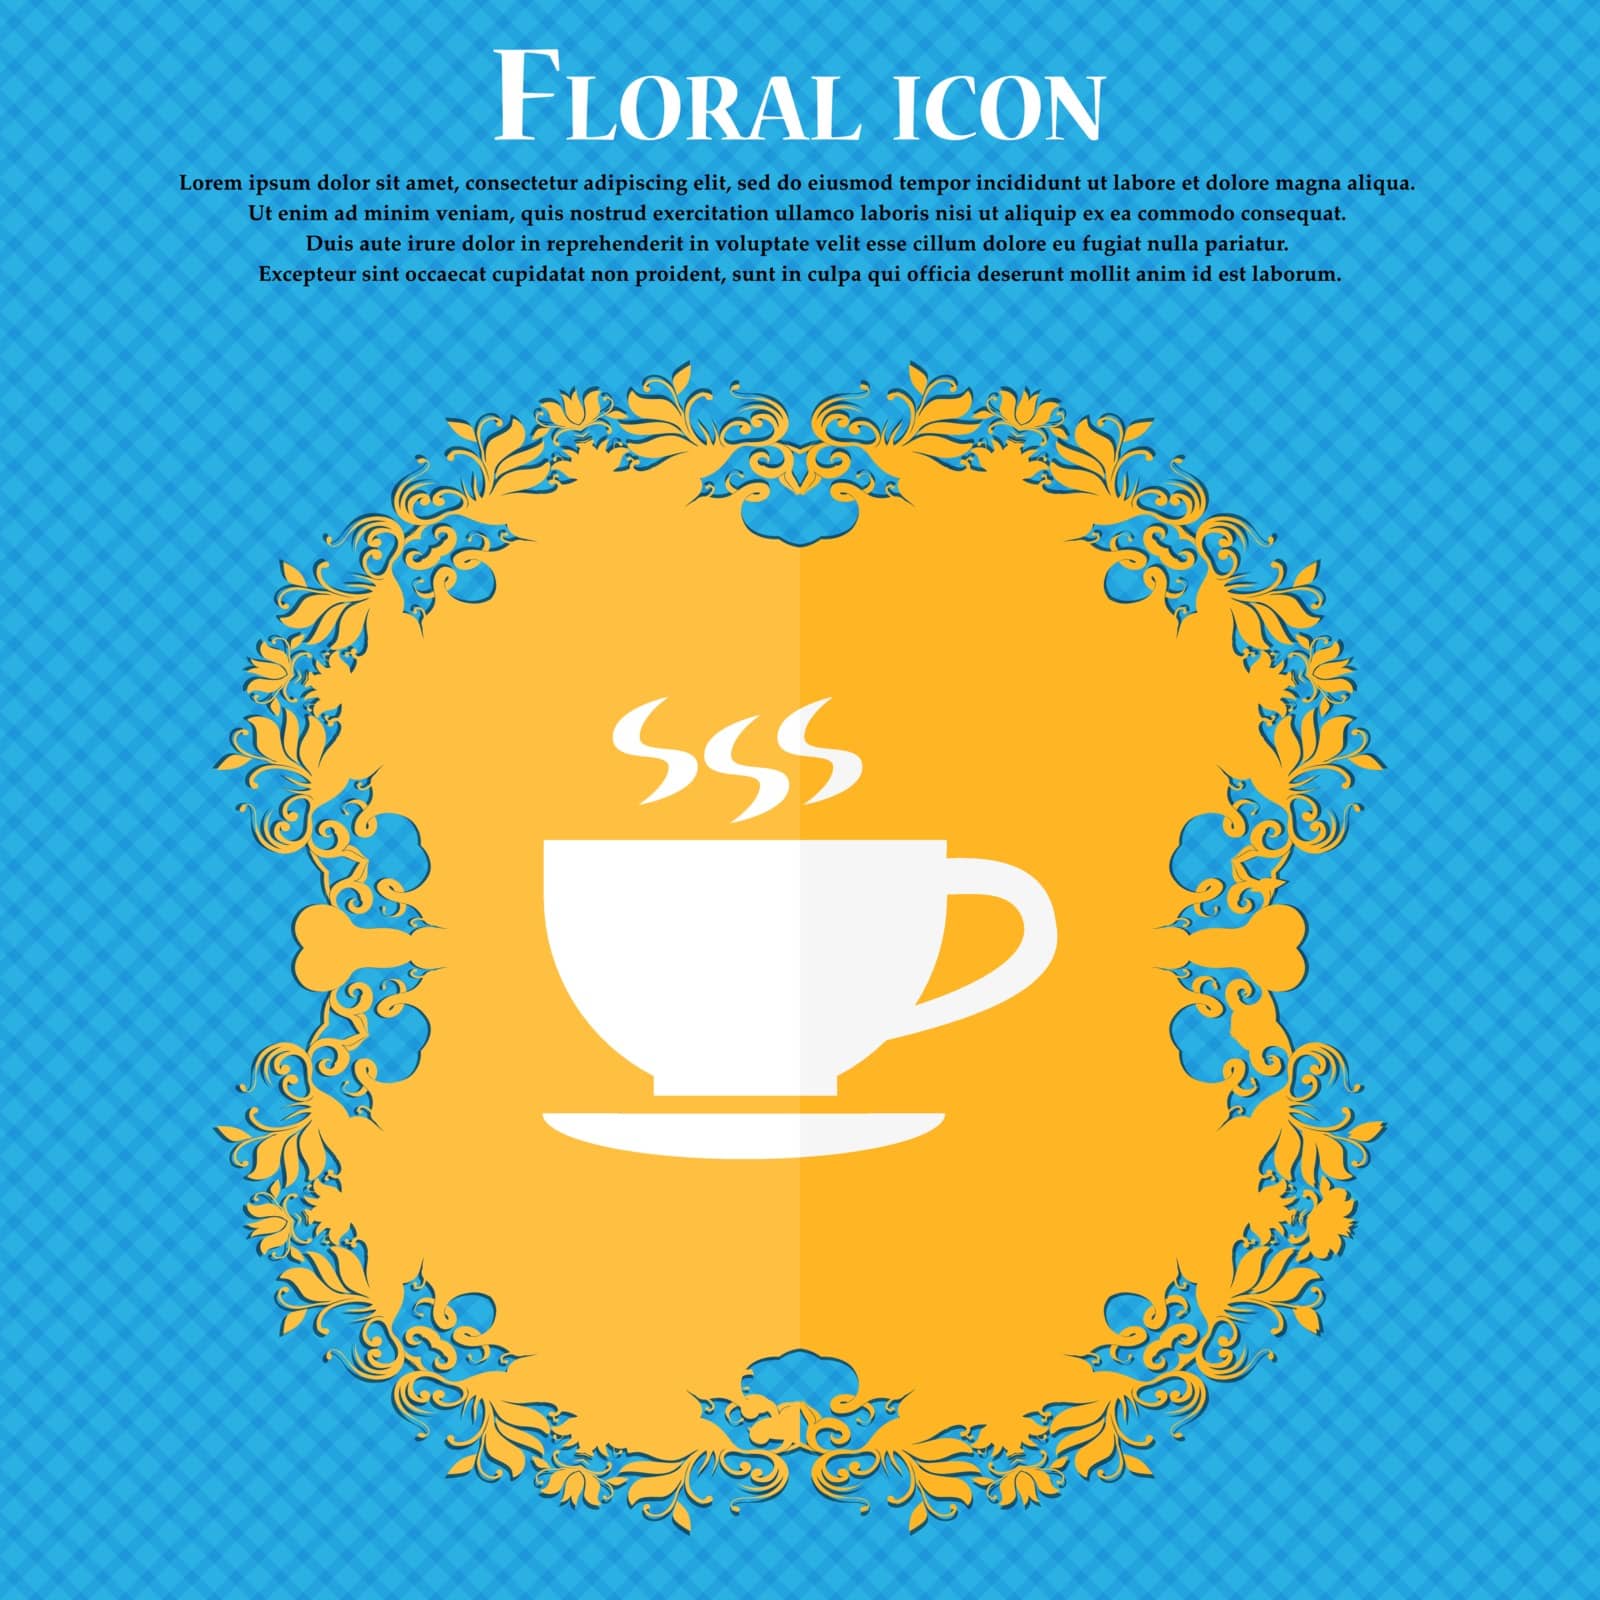 The tea and cup icon. Floral flat design on a blue abstract background with place for your text. Vector illustration